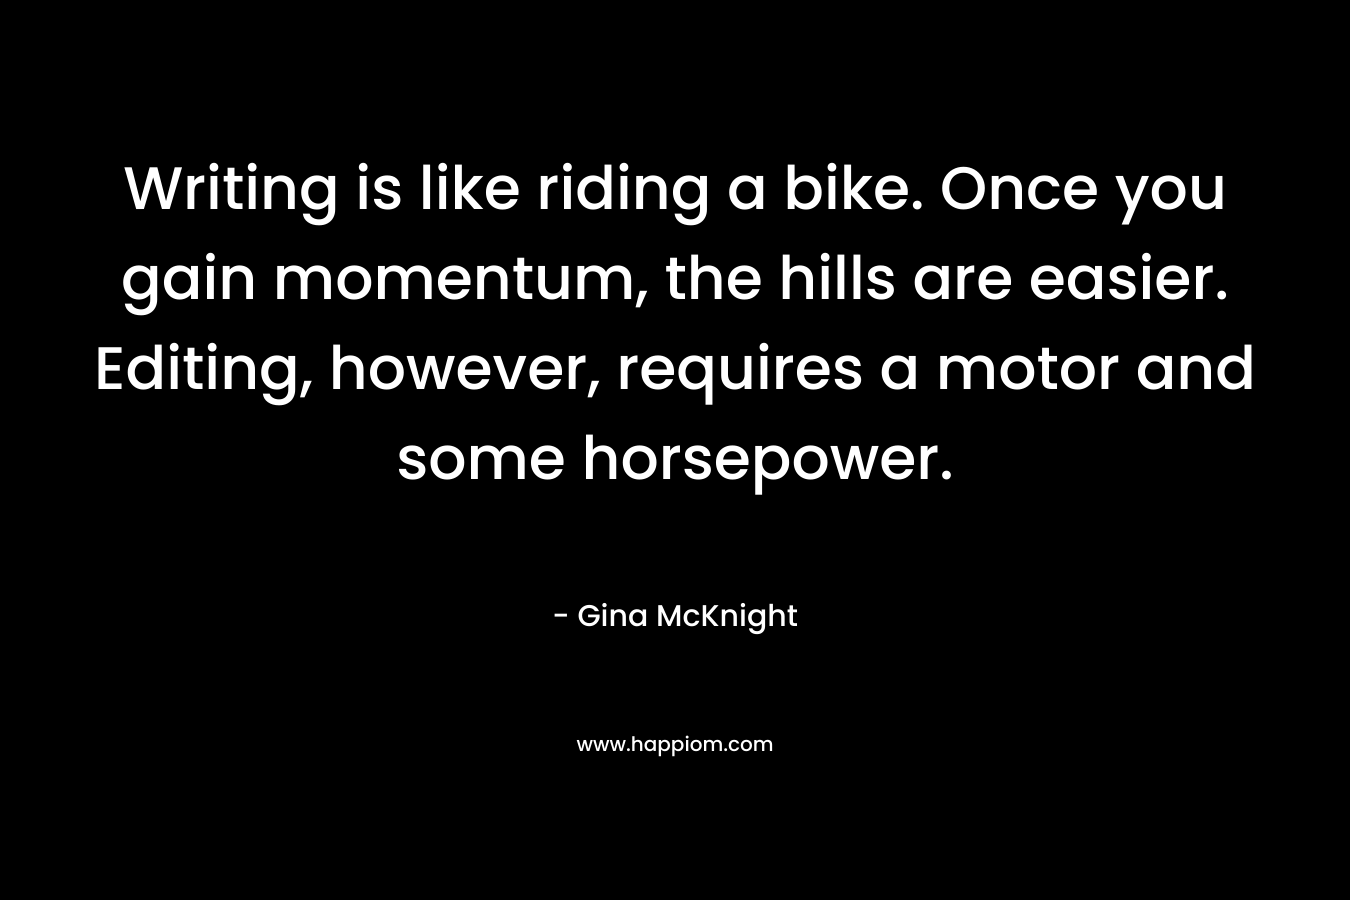 Writing is like riding a bike. Once you gain momentum, the hills are easier. Editing, however, requires a motor and some horsepower. – Gina McKnight